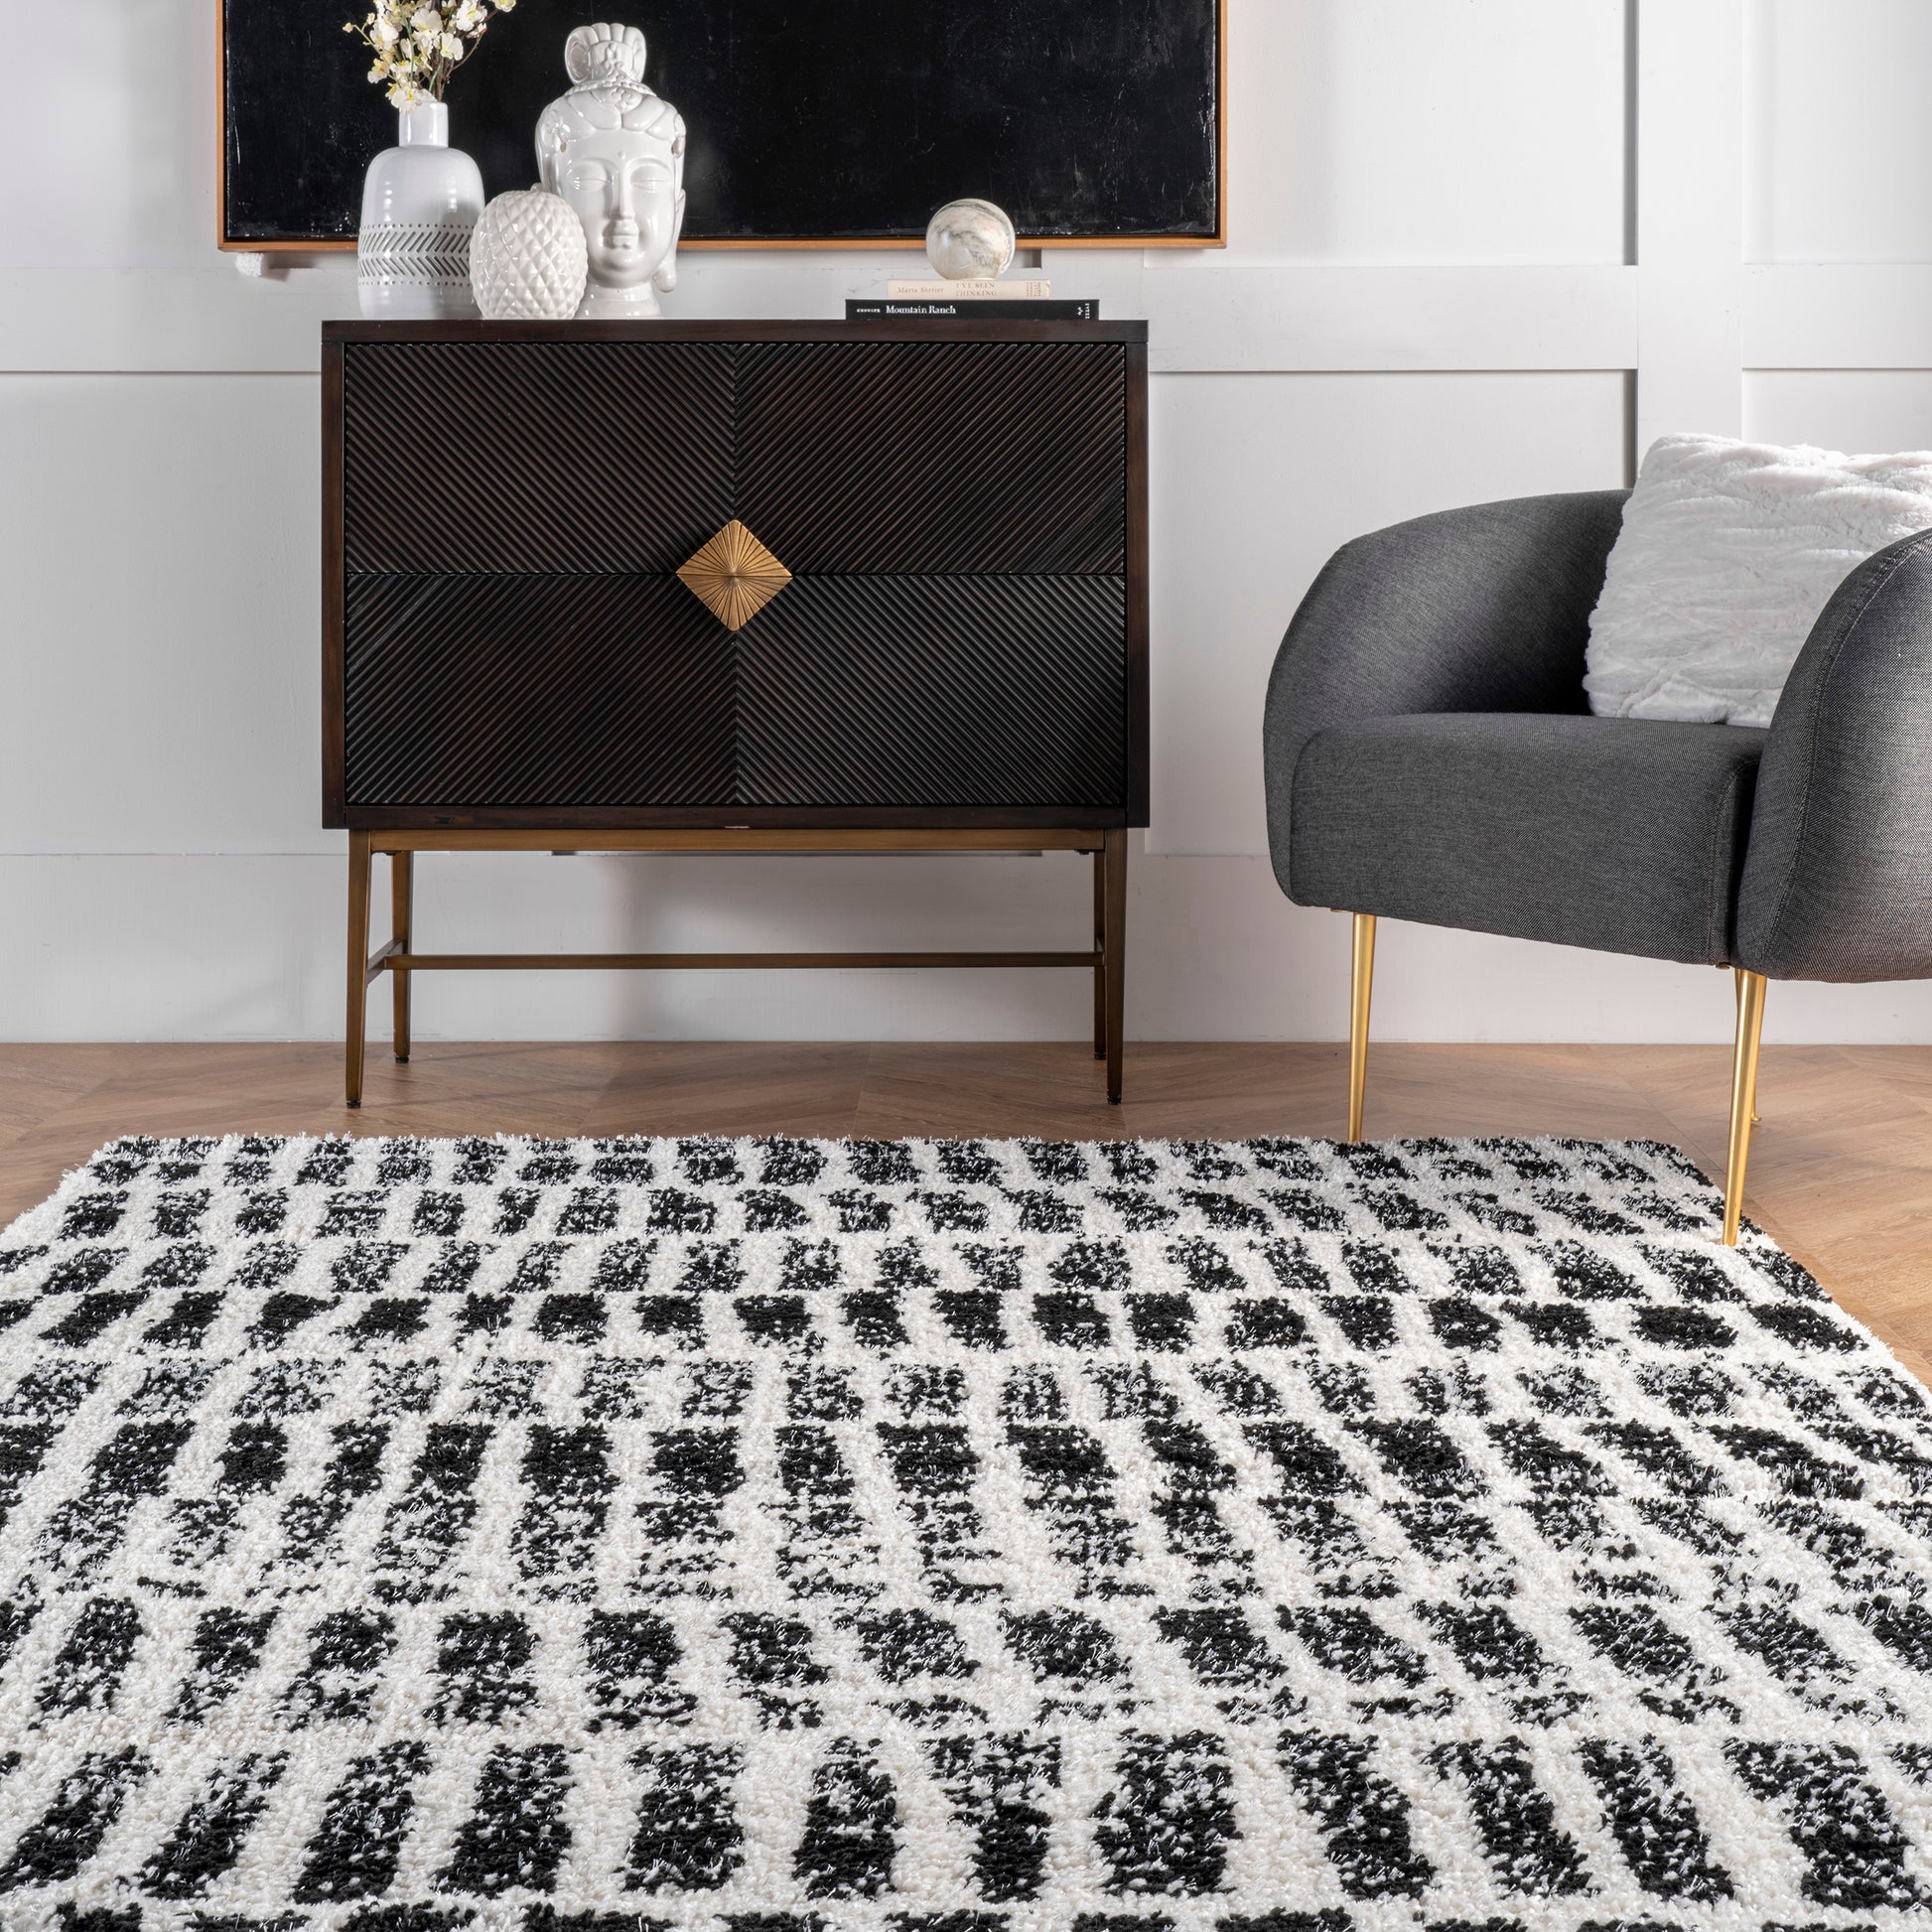 Nuloom Zoey Stripe Cozy Nzo1920A Black And White Area Rug